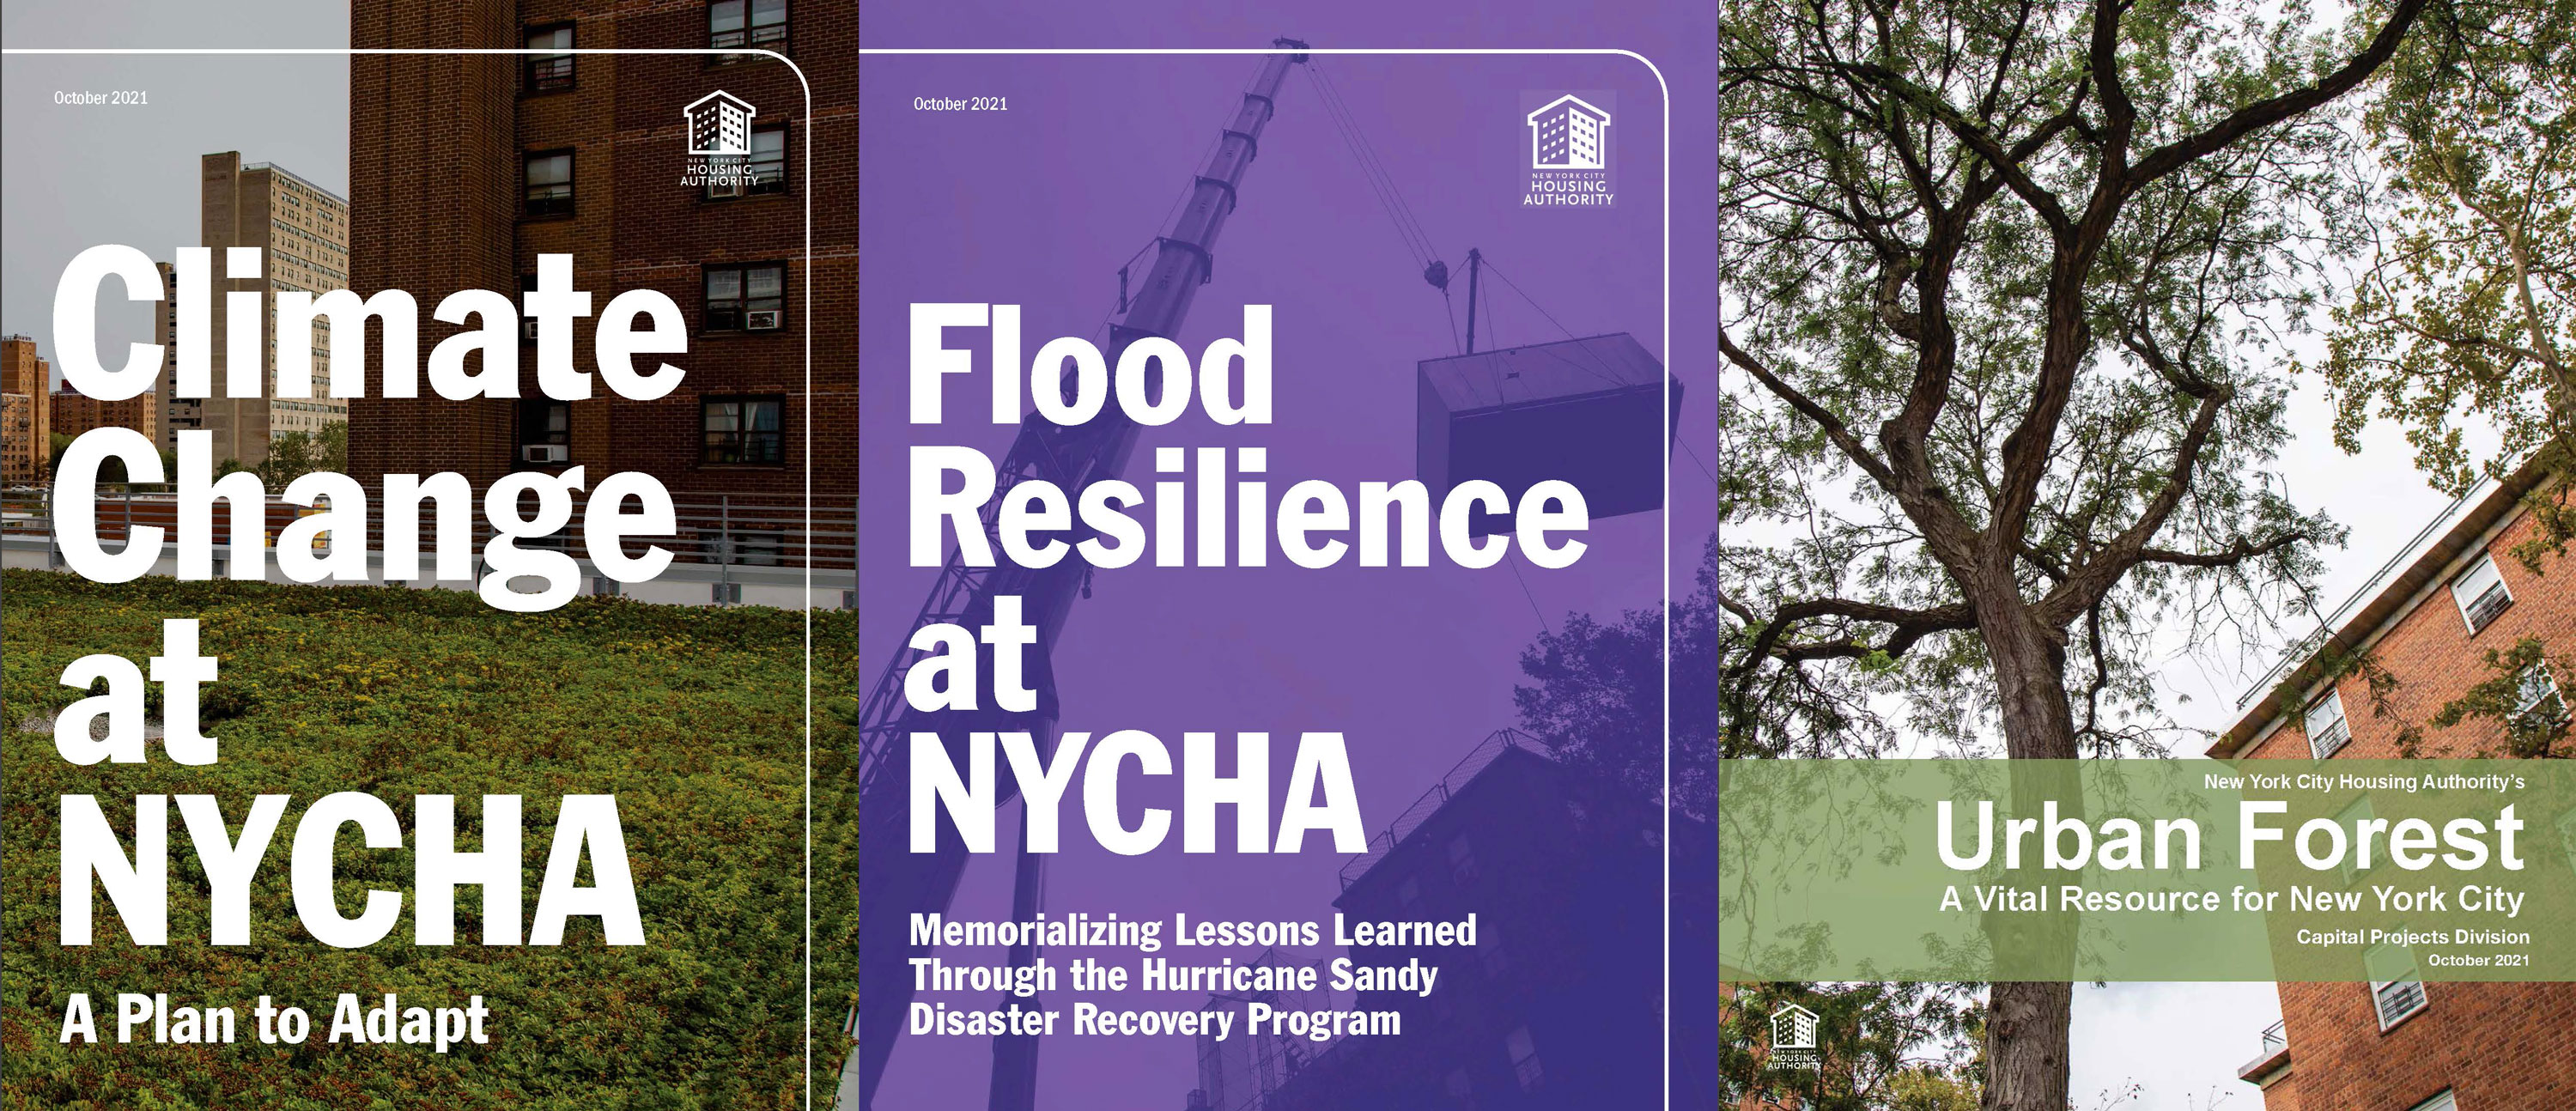 Climate-Adaptation-Plan-Sandy-Lessons-Press-Release